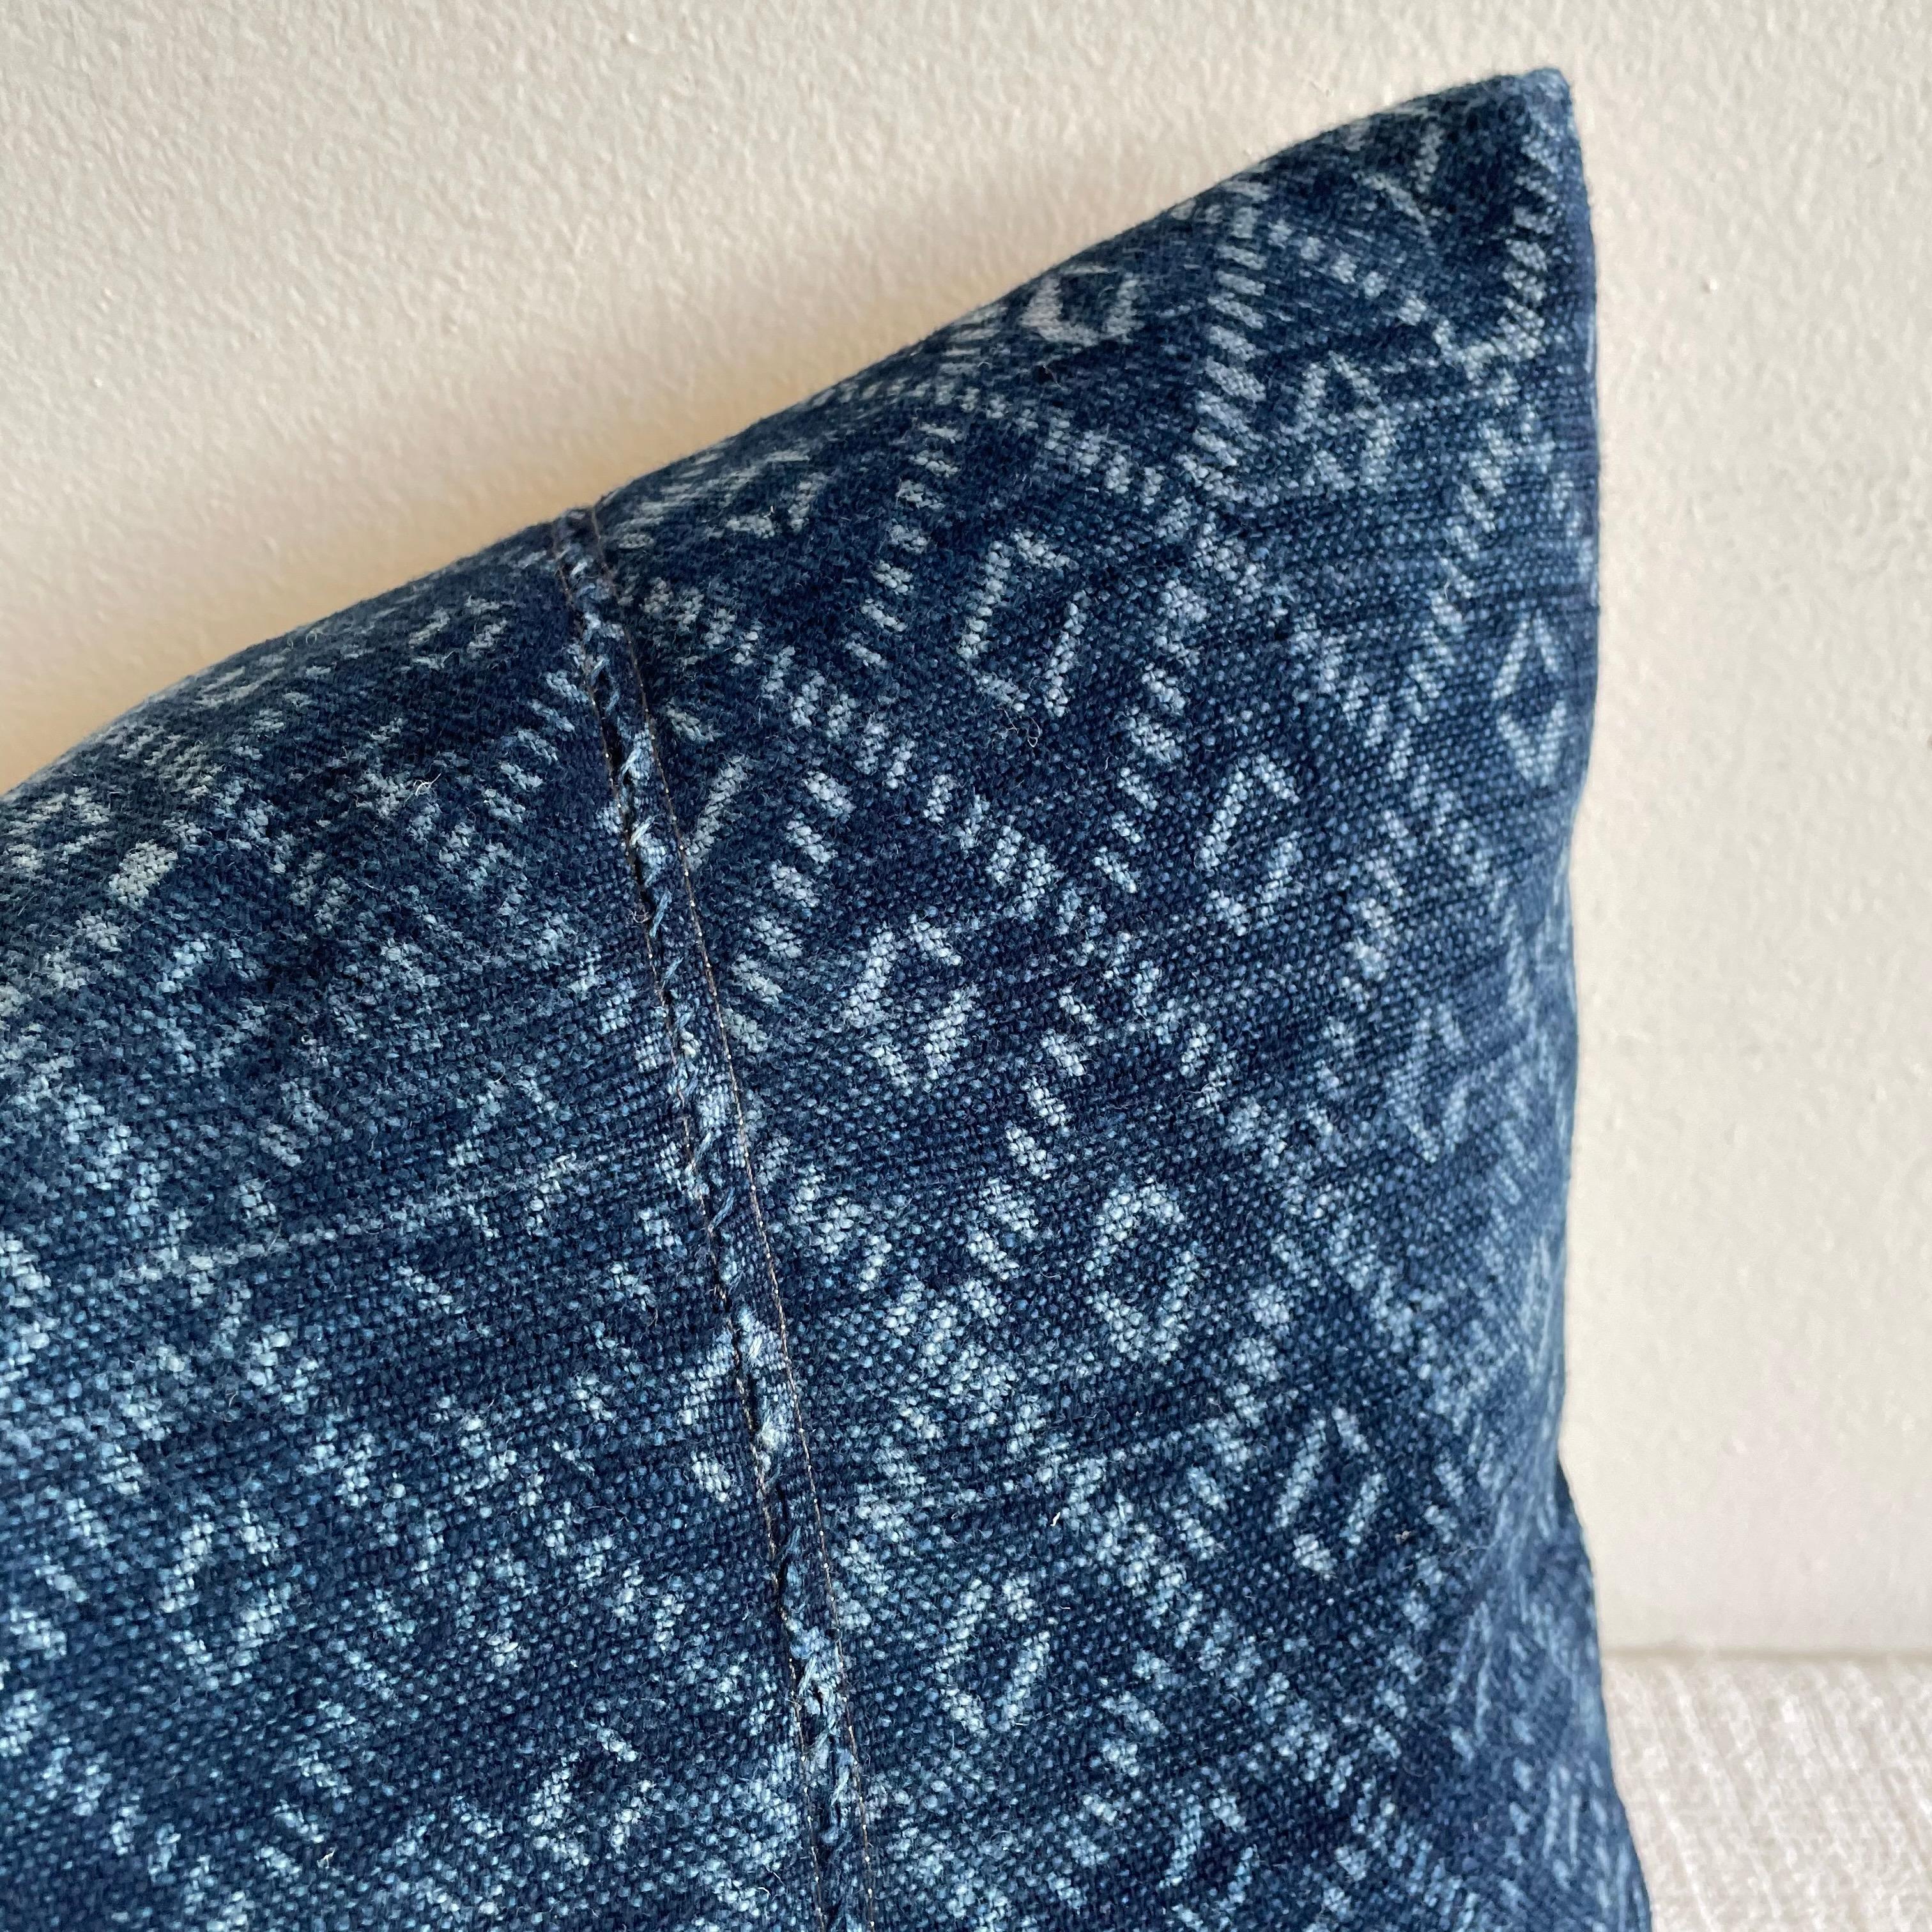 Vintage blue batik lumbar pillow with down feather insert.
This vintage textile pillow face features an antique batik fabric. The backing is 100% Belgian linen in natural linen. Our pillows are constructed with vintage one of a kind textiles from